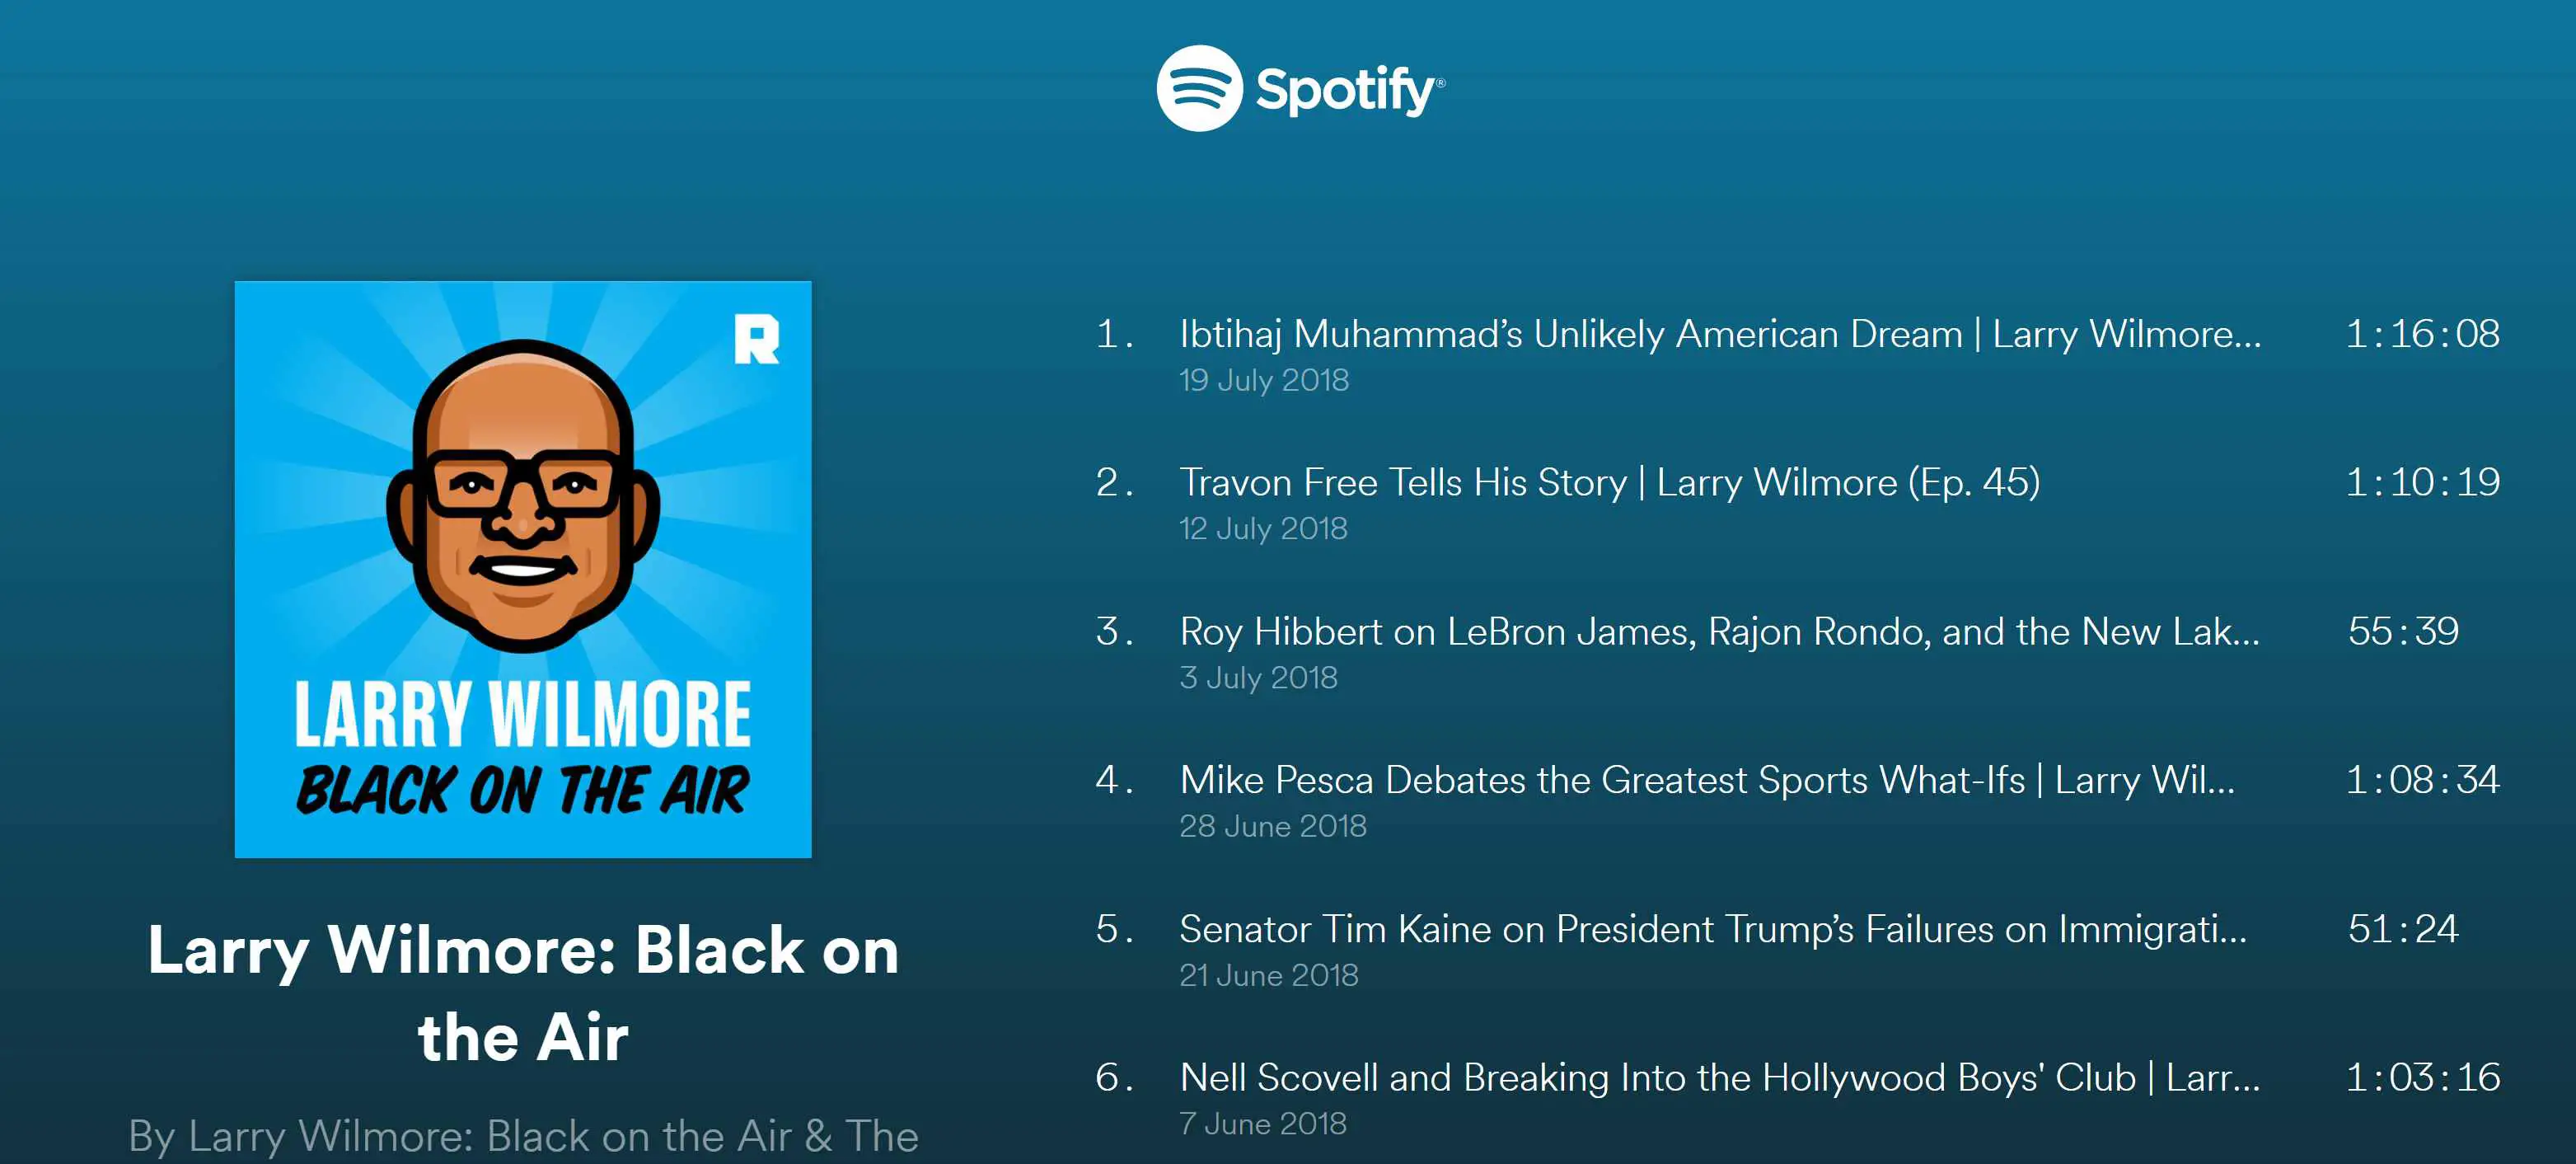 Larry Wilmore: podcast Black on the Air no Spotify